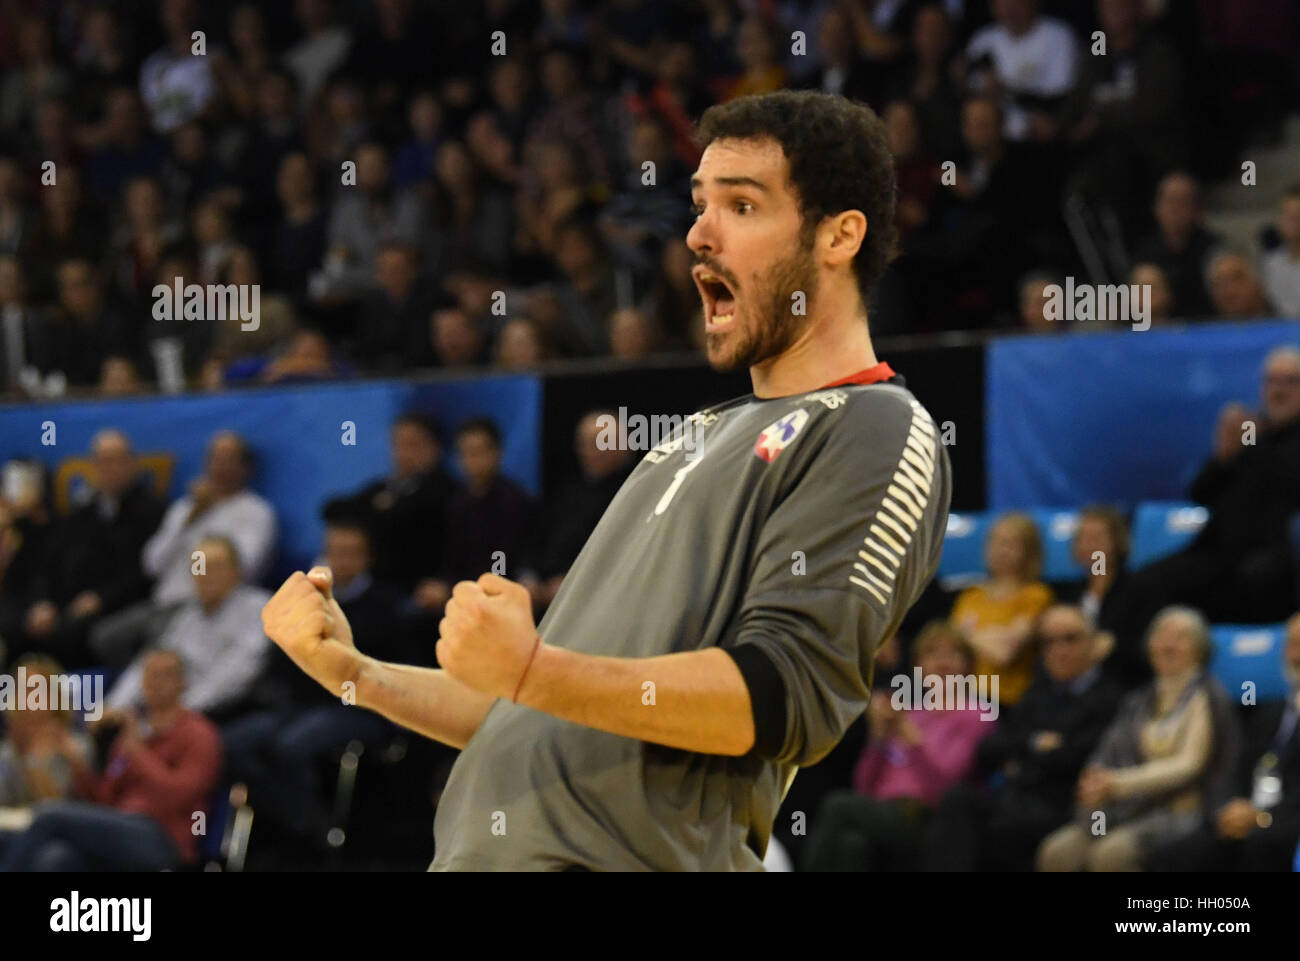 Rouen, France. 15th Jan, 2017. Chile's goalkeeper Rene Oliva reacts during the Handball World Cup group match between Chile and Germany at the Kindarena in Rouen, France, 15 January 2017. Photo: Marijan Murat/dpa/Alamy Live News Stock Photo